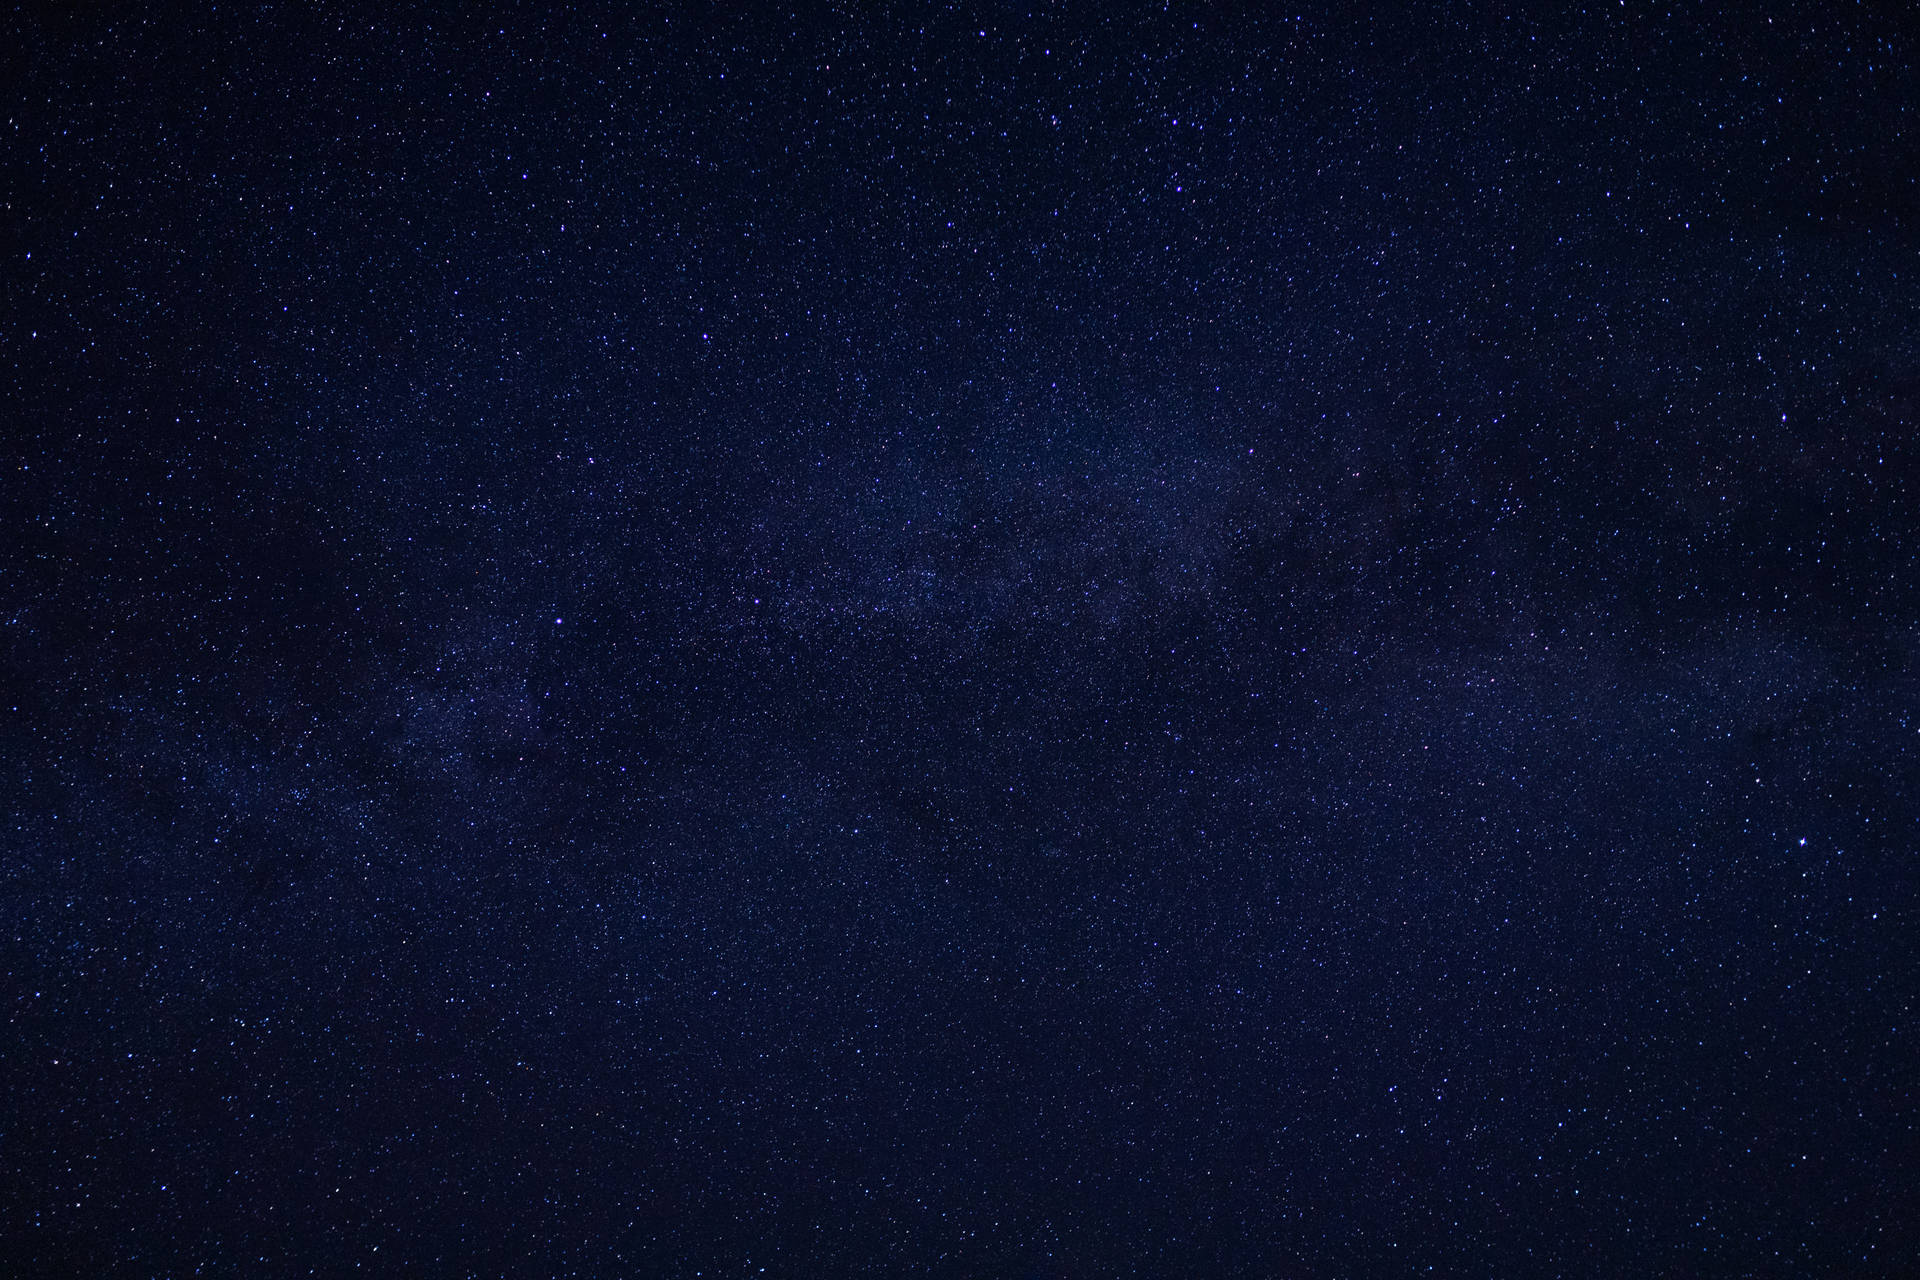 Let yourself get lost in the mesmerizing night sky of stars and darkness. Wallpaper